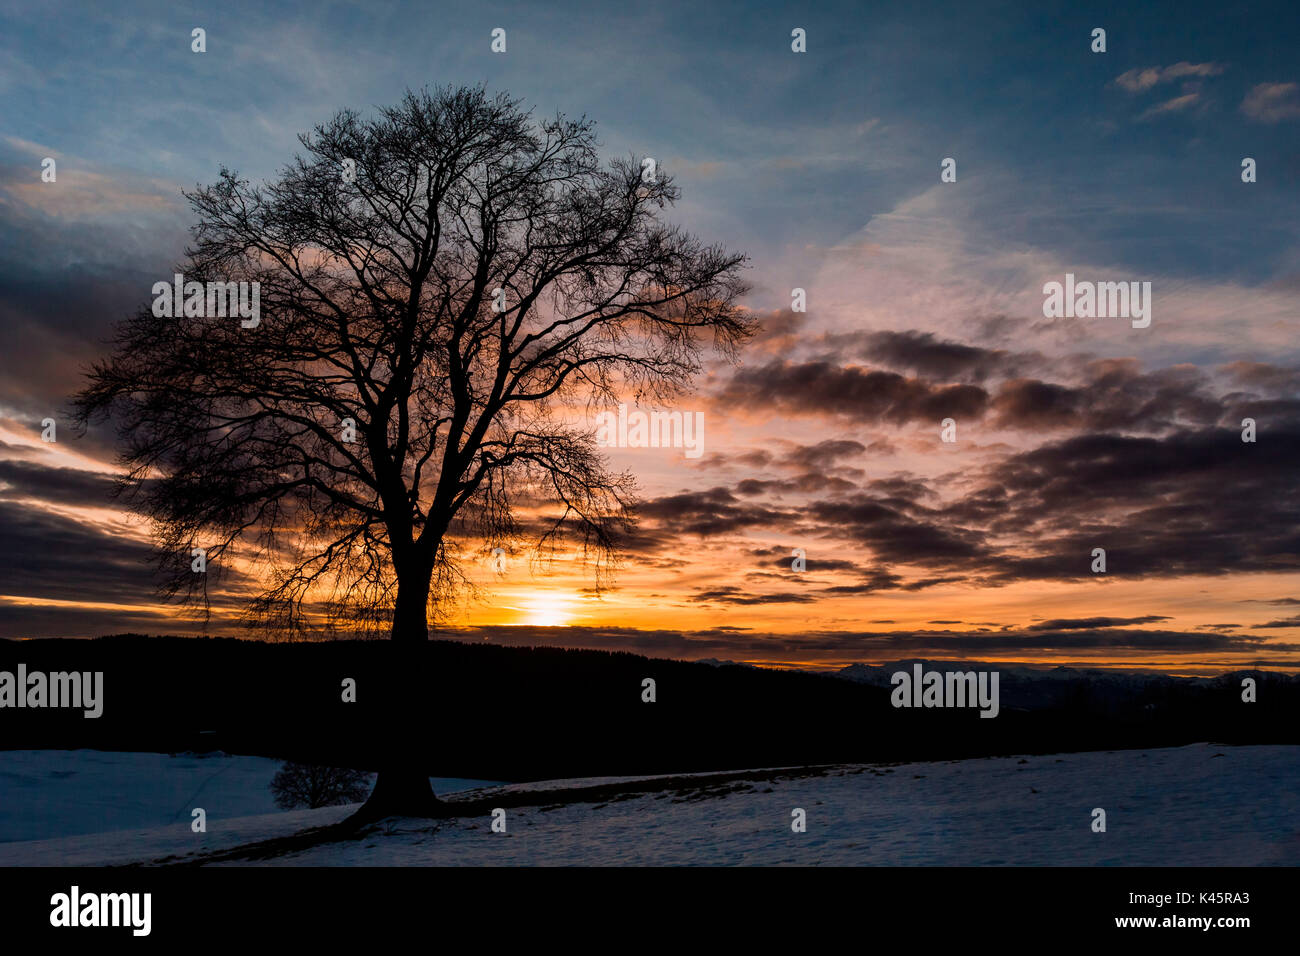 Forbice Valley, Altopiano di Asiago, Province of Vicenza, Veneto, Italy. Large beech tree at sunset. Stock Photo